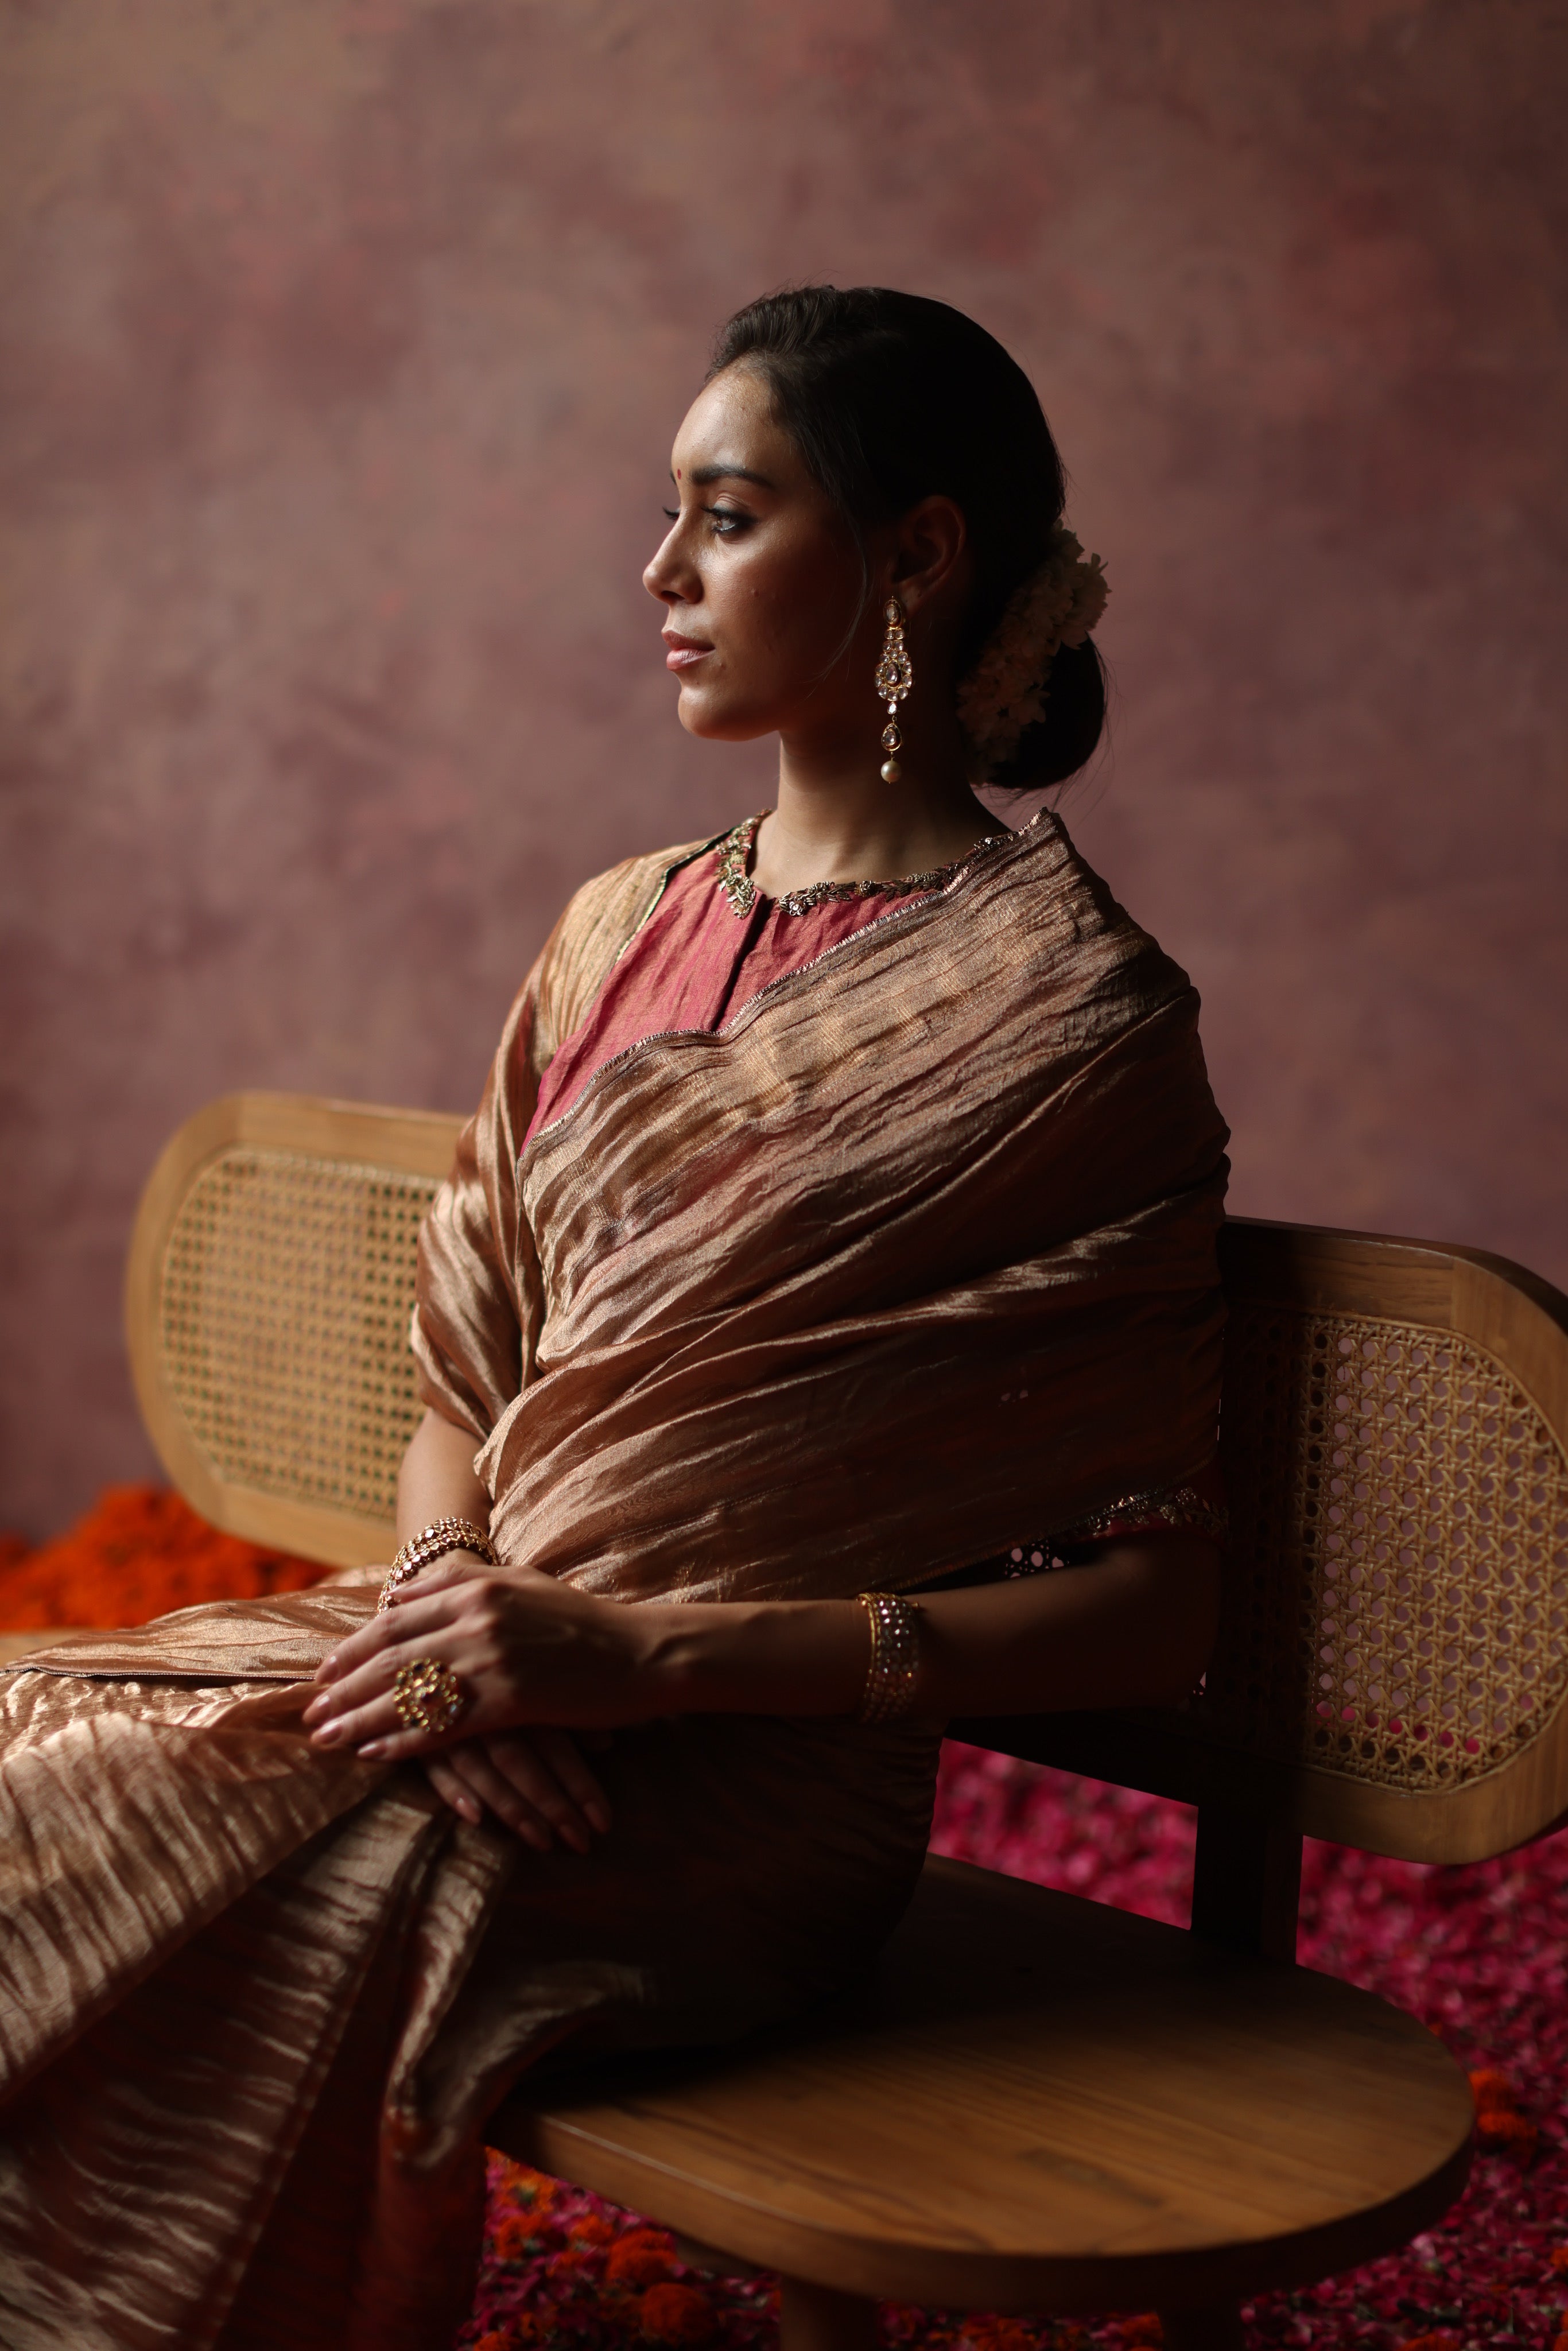 80+ Sitting Beautiful Young Woman Posing In A Sari Dress Stock Photos,  Pictures & Royalty-Free Images - iStock